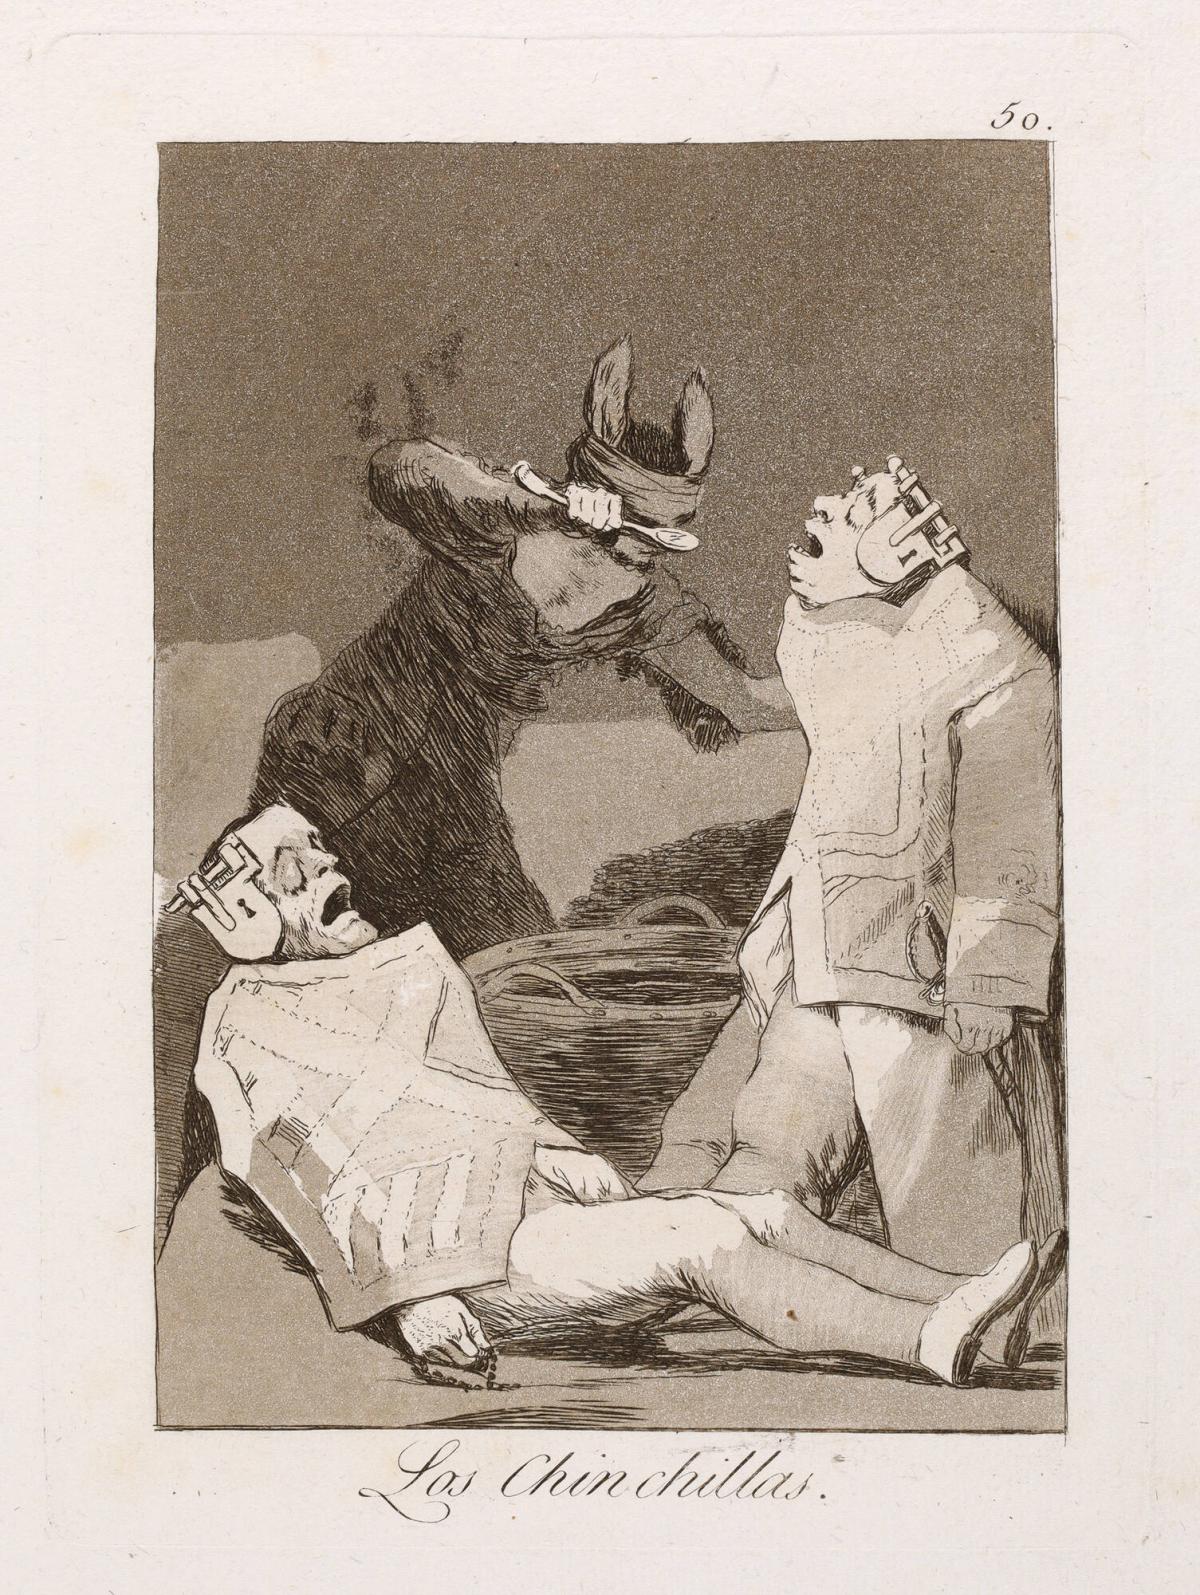 Los Chinchillas (The Chinchillas), plate 50 from the first edition of Los Caprichos (Madrid, 1799)